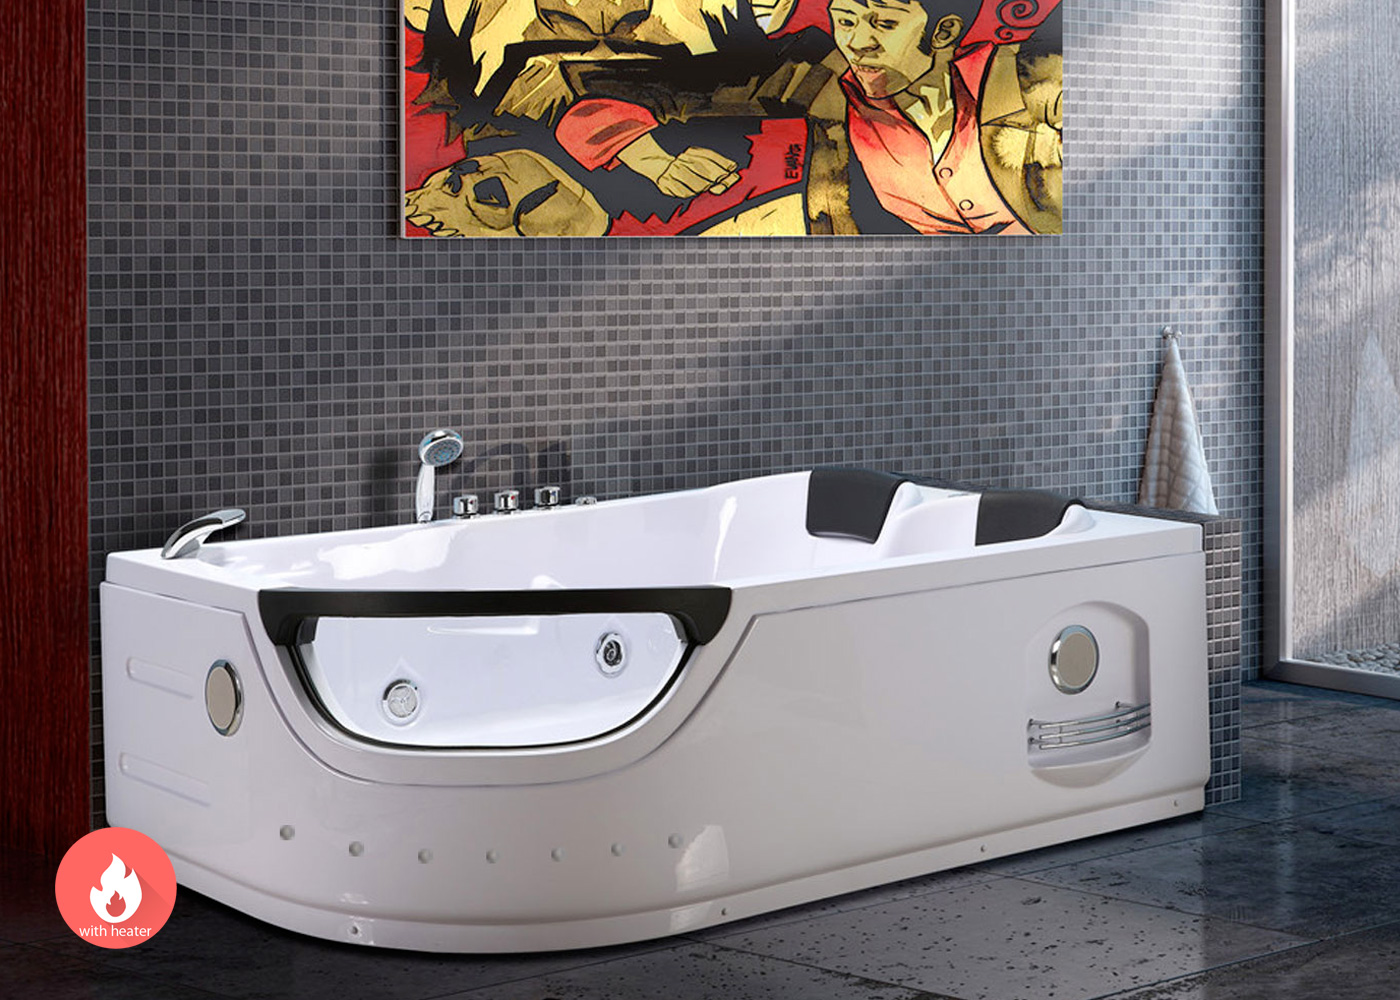 Whirlpool Bathtub 70 8 X 47 2 Hot Tub With Heater And Double Pump Elite